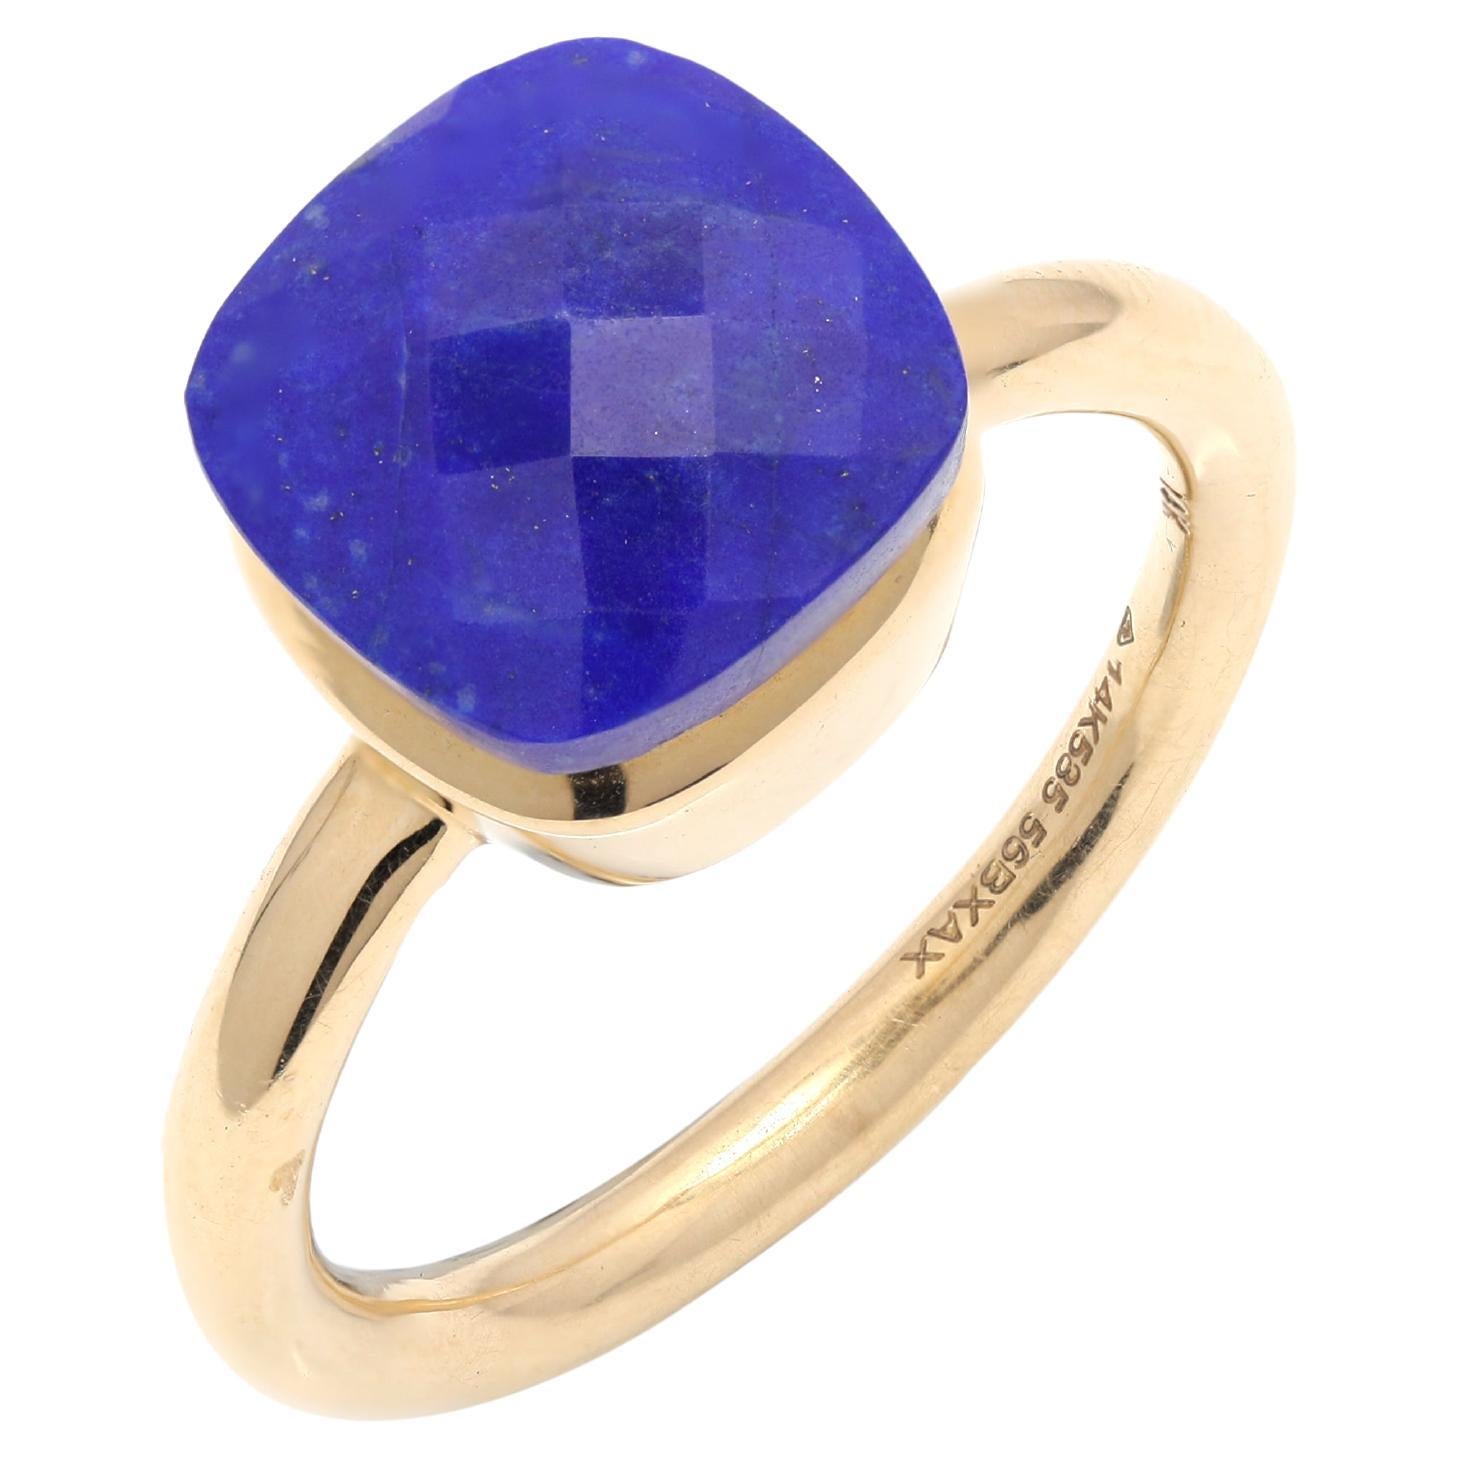 For Sale:  6.9 Carat Cushion Lapis Lazuli Ring in 14k Solid Yellow Gold Mens Jewelry